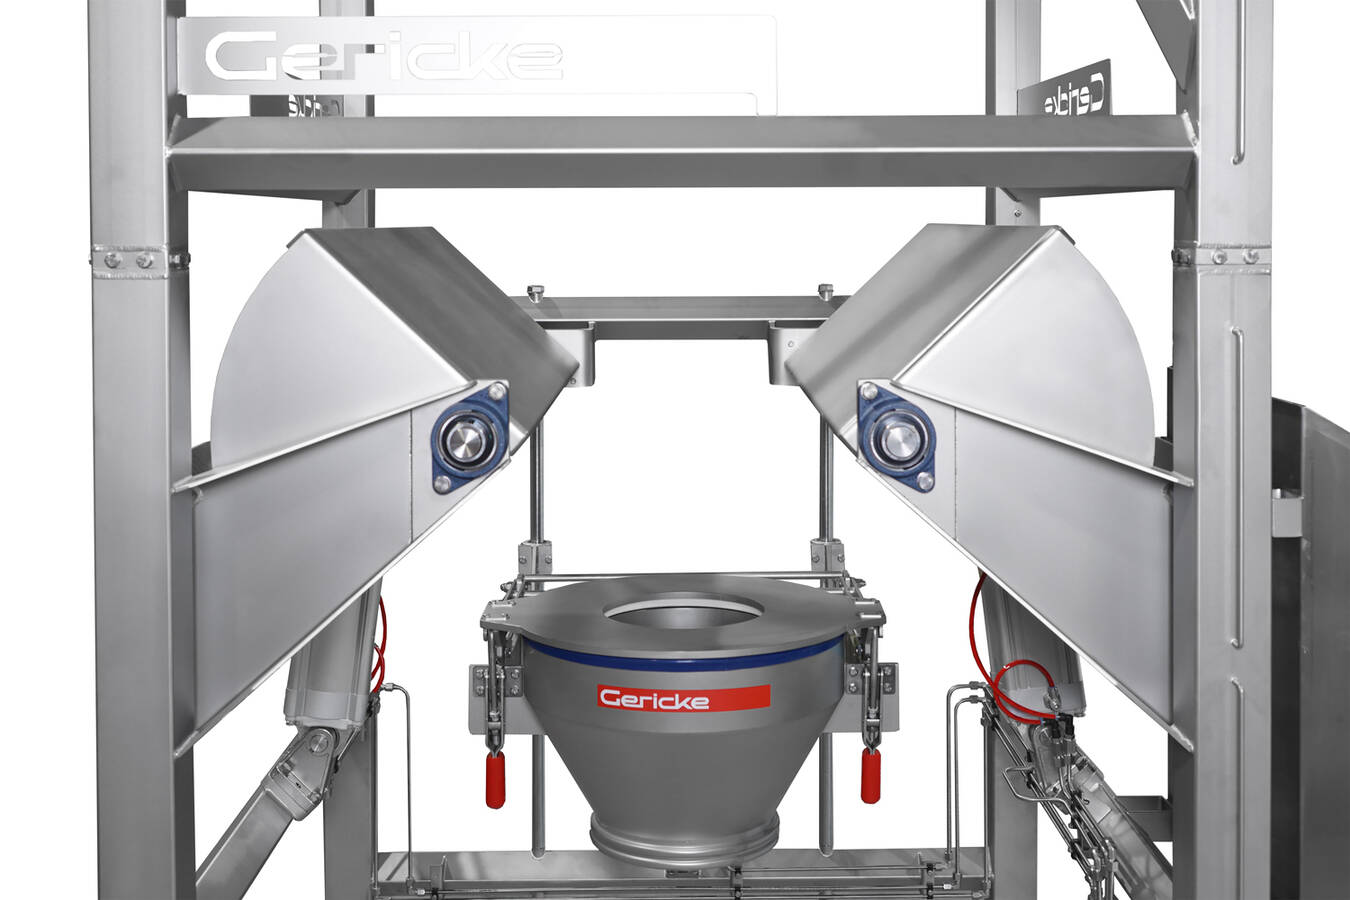 Updated design of the Gericke Big Bag Unloader  Based on customer feedback and new safety and hygiene requirements, Gericke has further developed the Big Bag unloading stations.